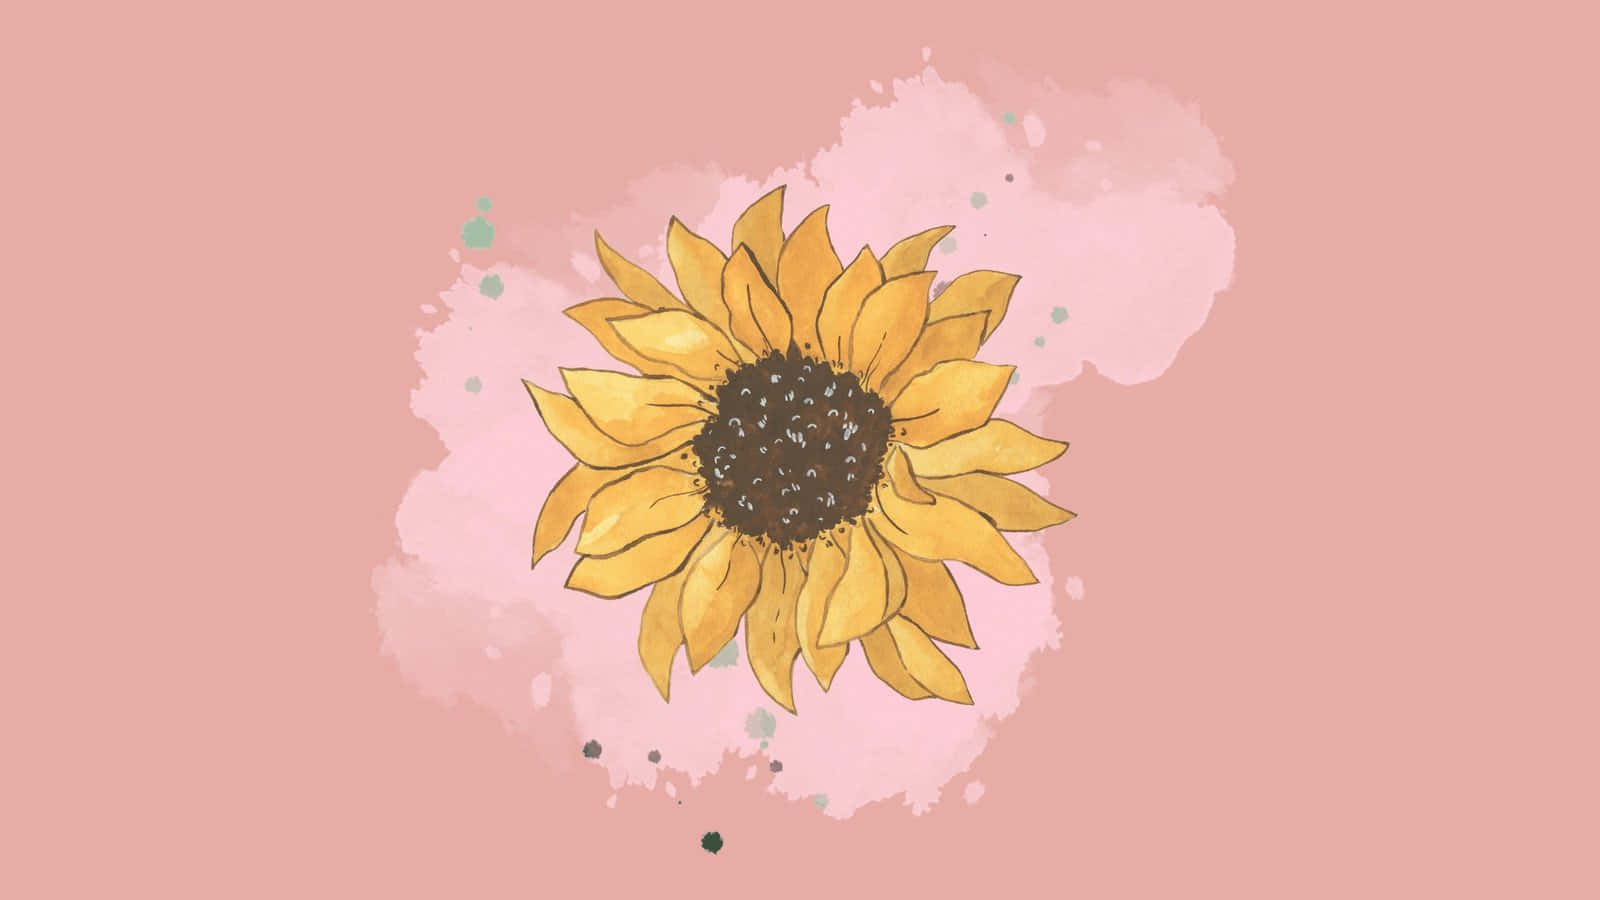 "Brighten your day with a beautiful aesthetic sunflower background"